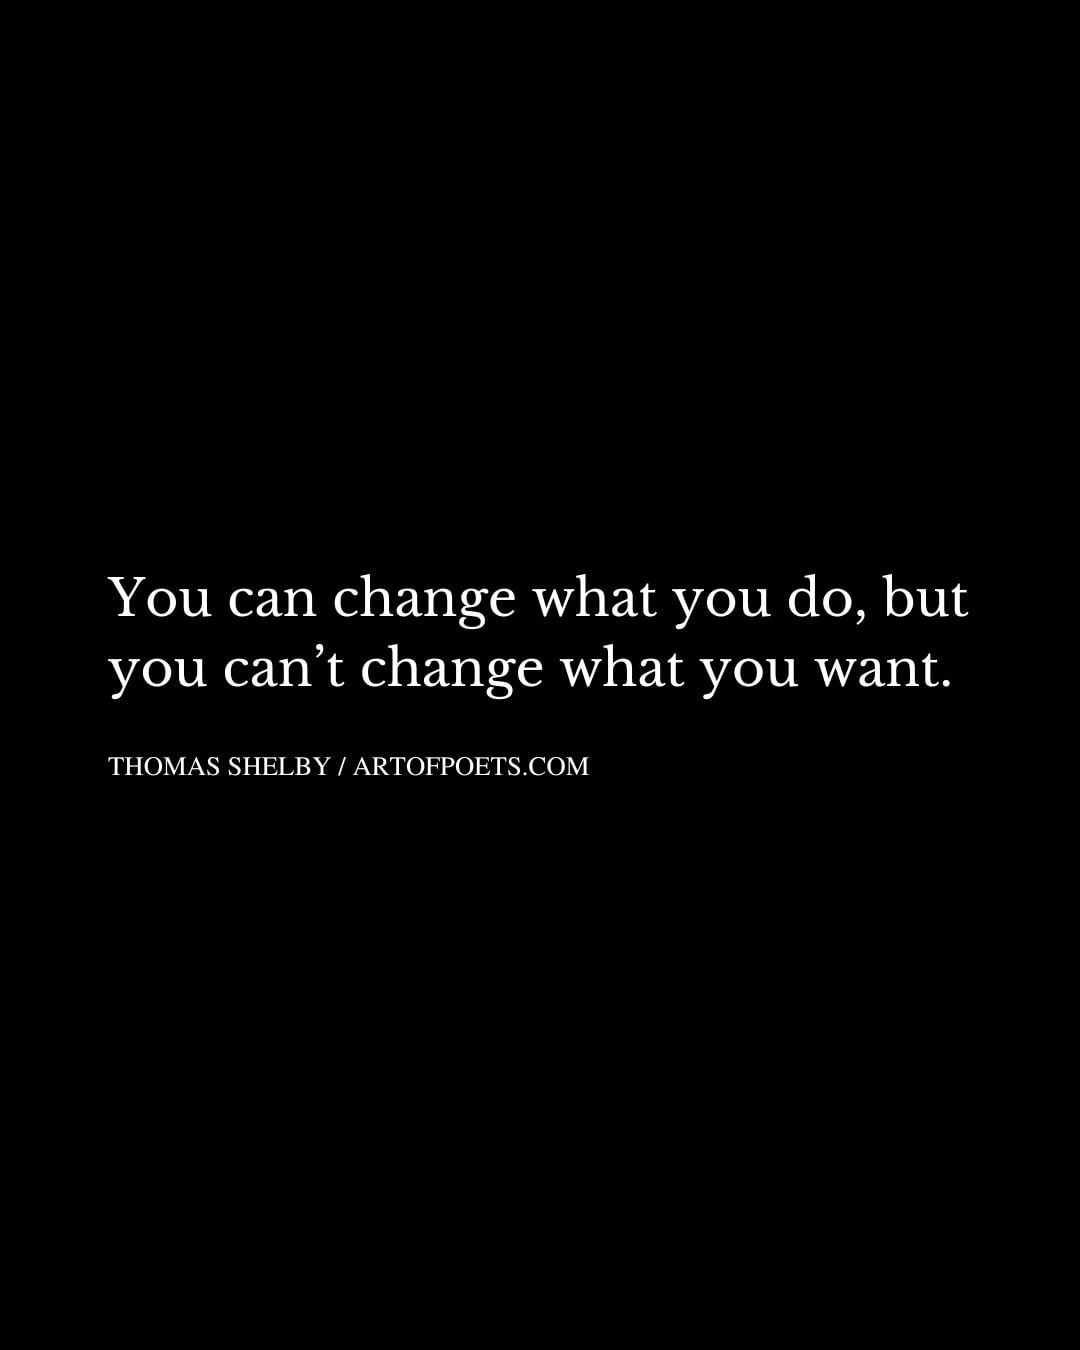 You can change what you do but you cant change what you want